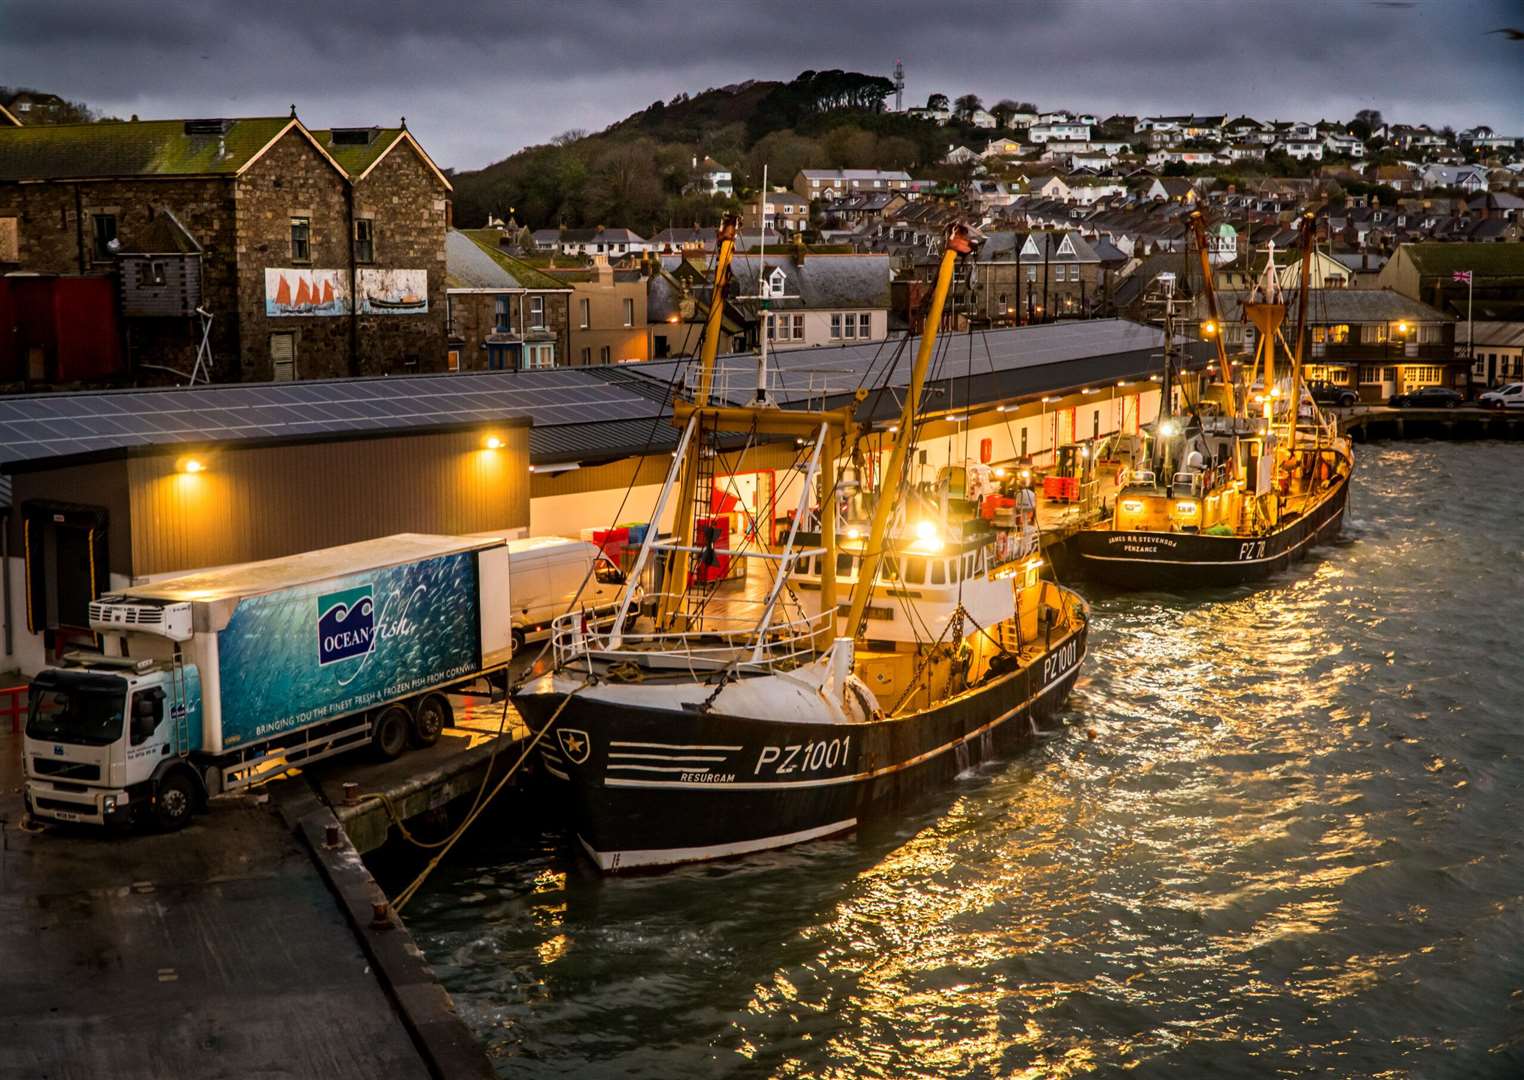 The winning picture in the Shipwrecked Mariners’ Society's 2020 photography contest, Beam Trawlers Landing to the Fish Market at Night by Laurence Hartwell.